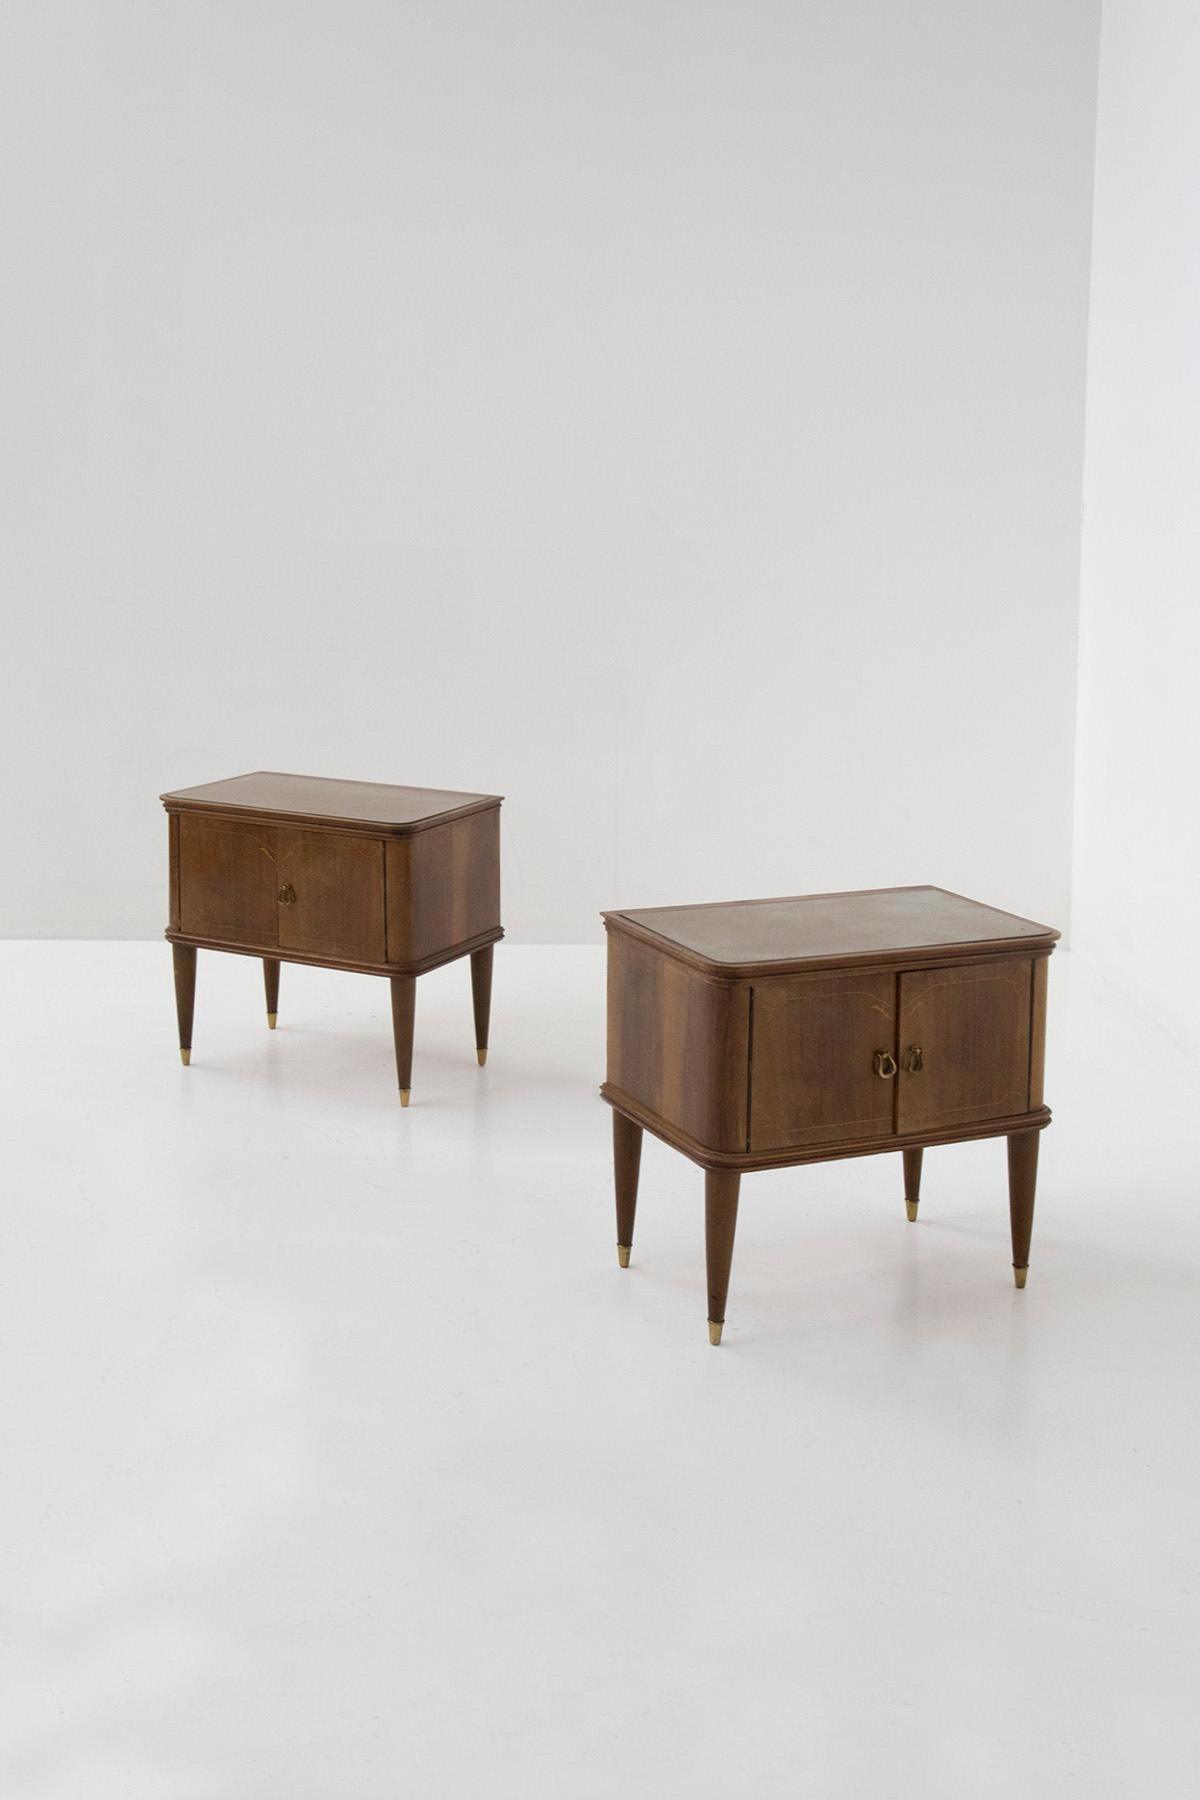 Pair of bedside tables attributed to Paolo Buffa from the Italian 1950s. The pair features an elegant and understated wooden frame with small designs on the wood as a decorative element. The nightstands open via two doors that can be opened by two